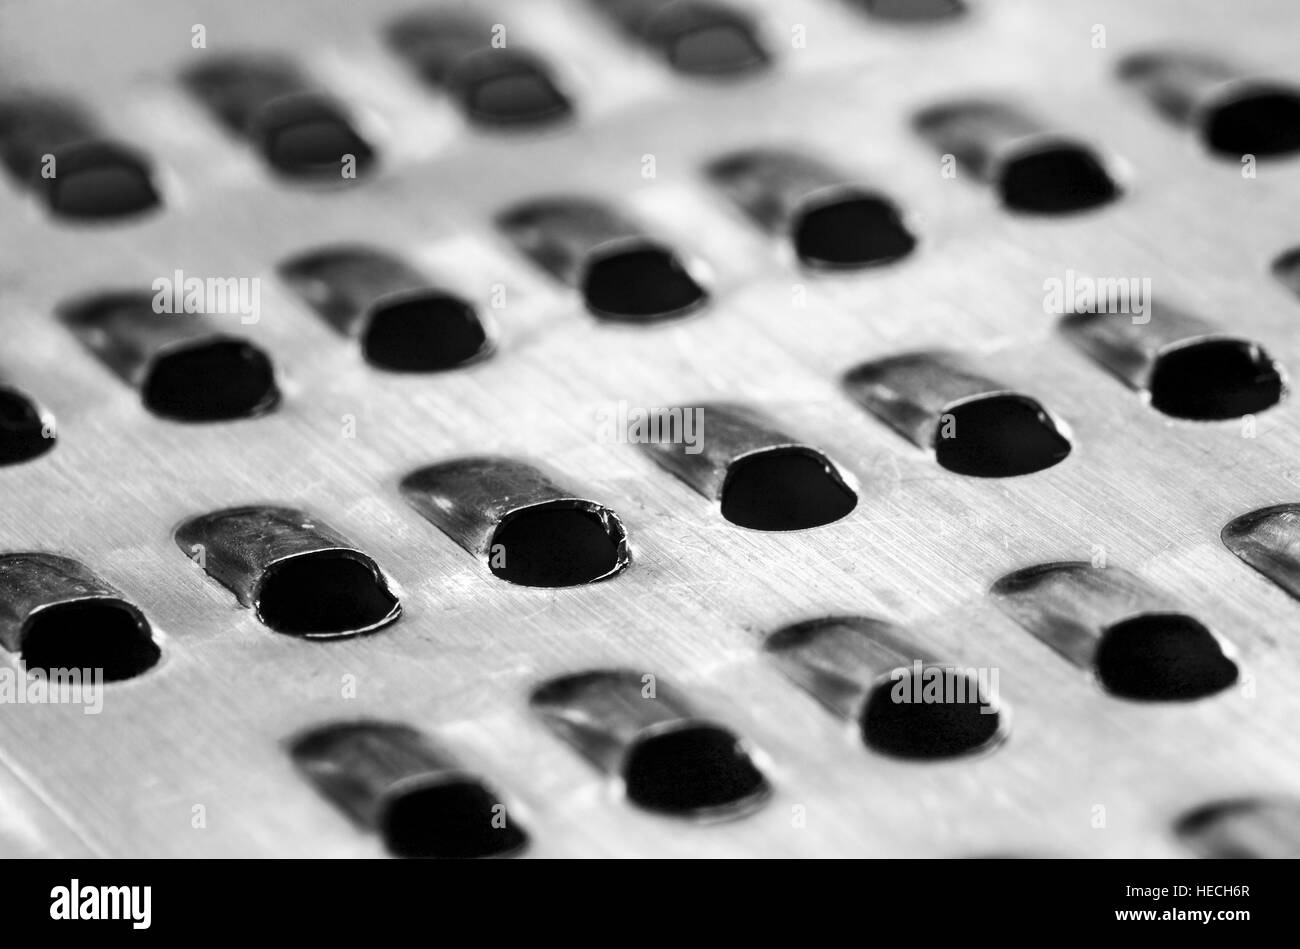 https://c8.alamy.com/comp/HECH6R/close-up-abstract-view-of-a-stainless-steel-cheese-grater-showing-HECH6R.jpg